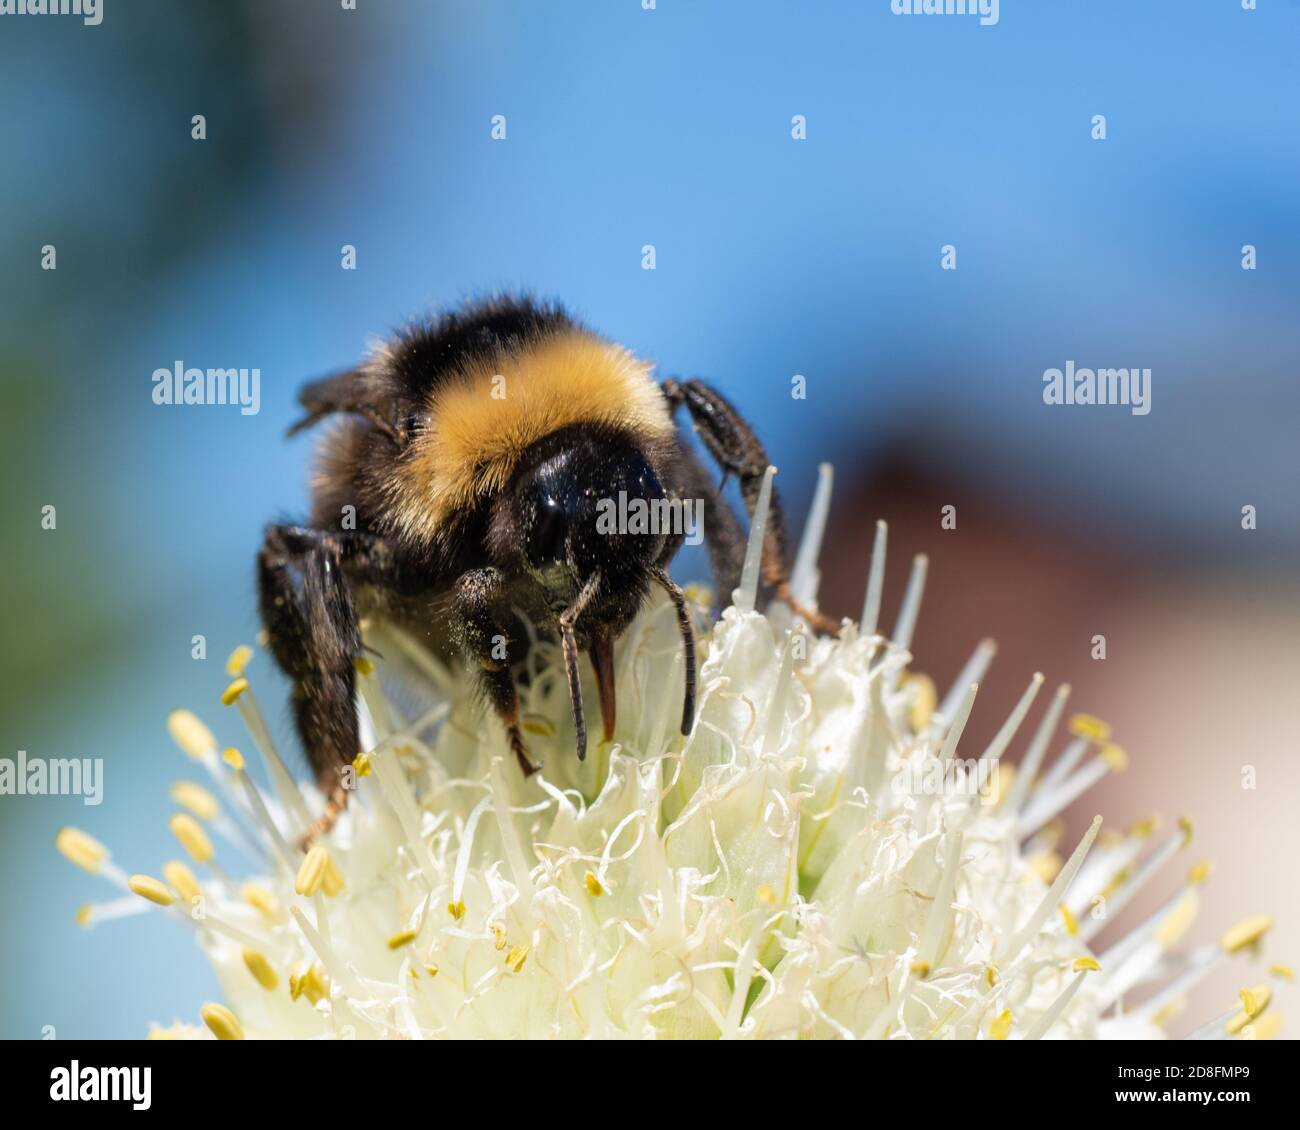 A closeup of a bumblebee on a yellow onion flower pollen. Collecting pollen for honey production. Closeup Copy Space Stock Photo